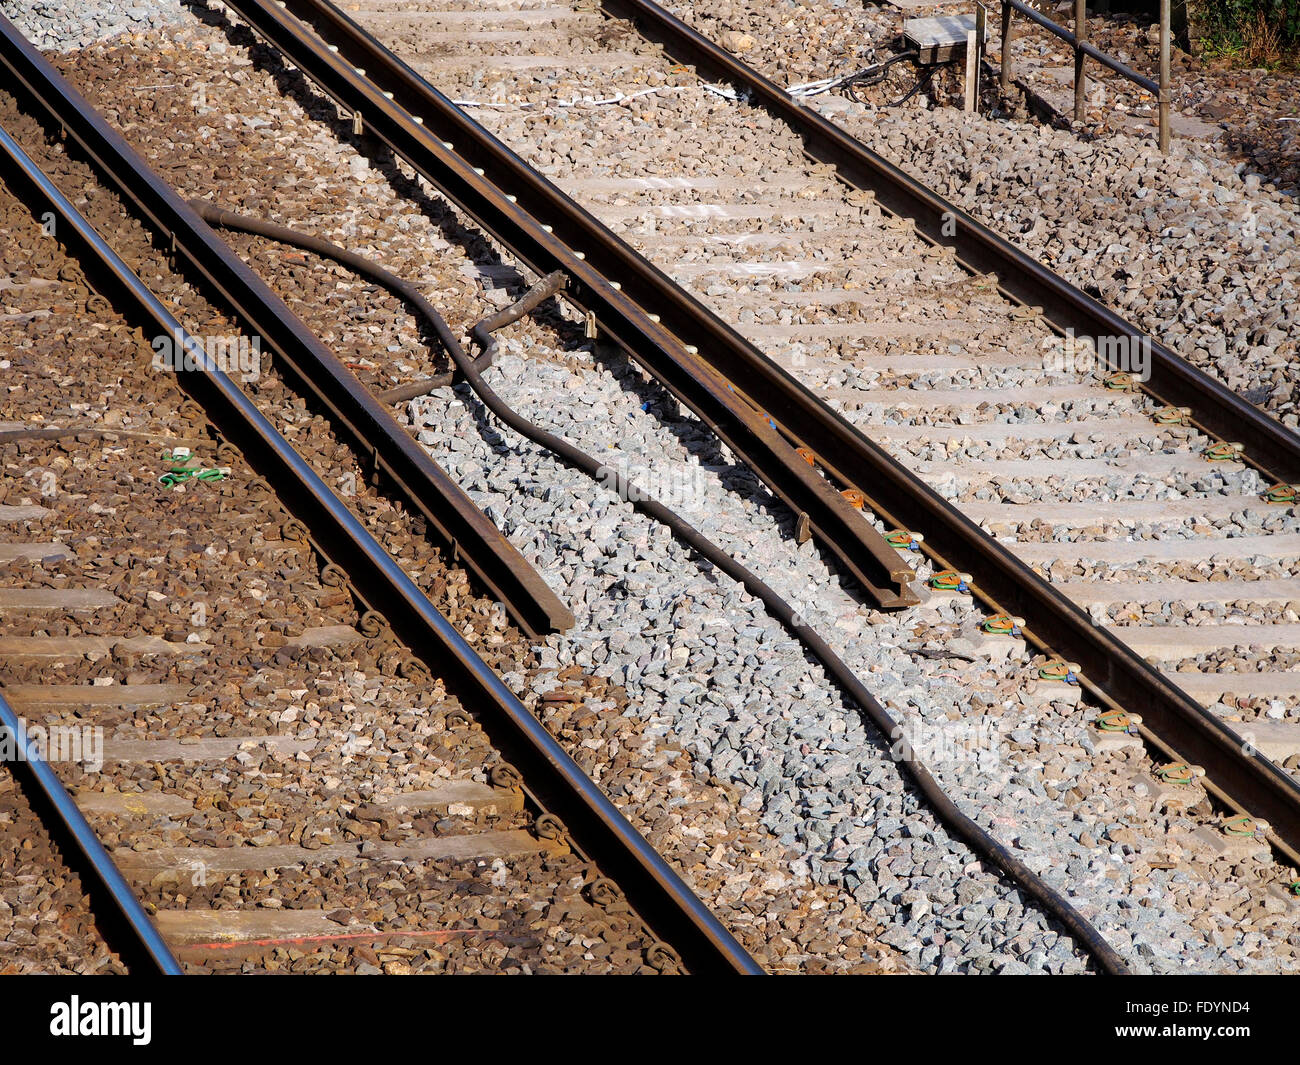 Third rail electrified railway track showing termination of electric rail at an old level crossing used for maintenance access. Stock Photo